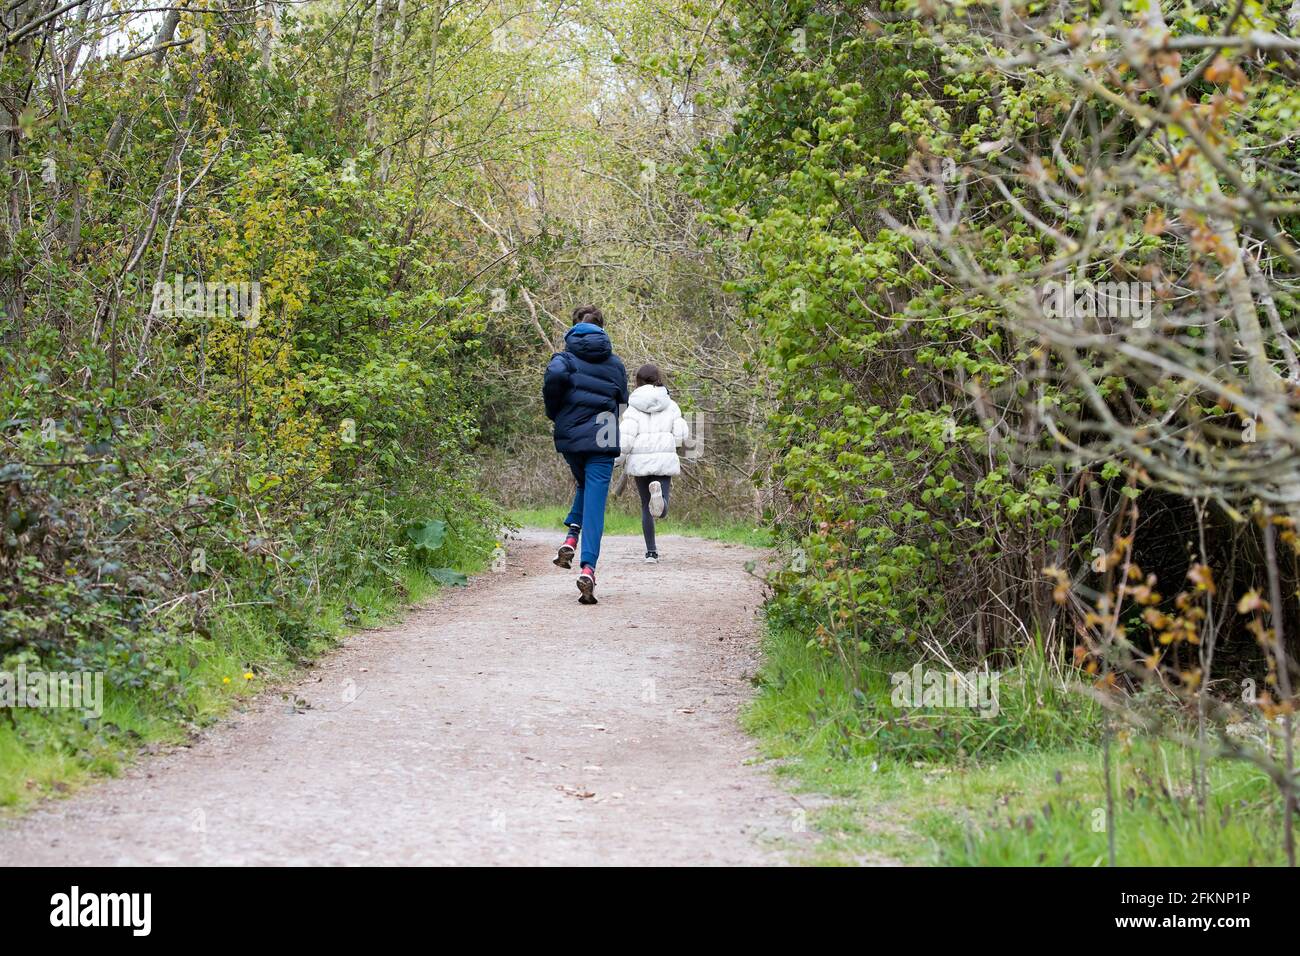 A young boy and girl enjoying a day out running down a tree lined path at RSPB Fairburn Ings, Nature Reserve,Yorkshire U.K. Stock Photo